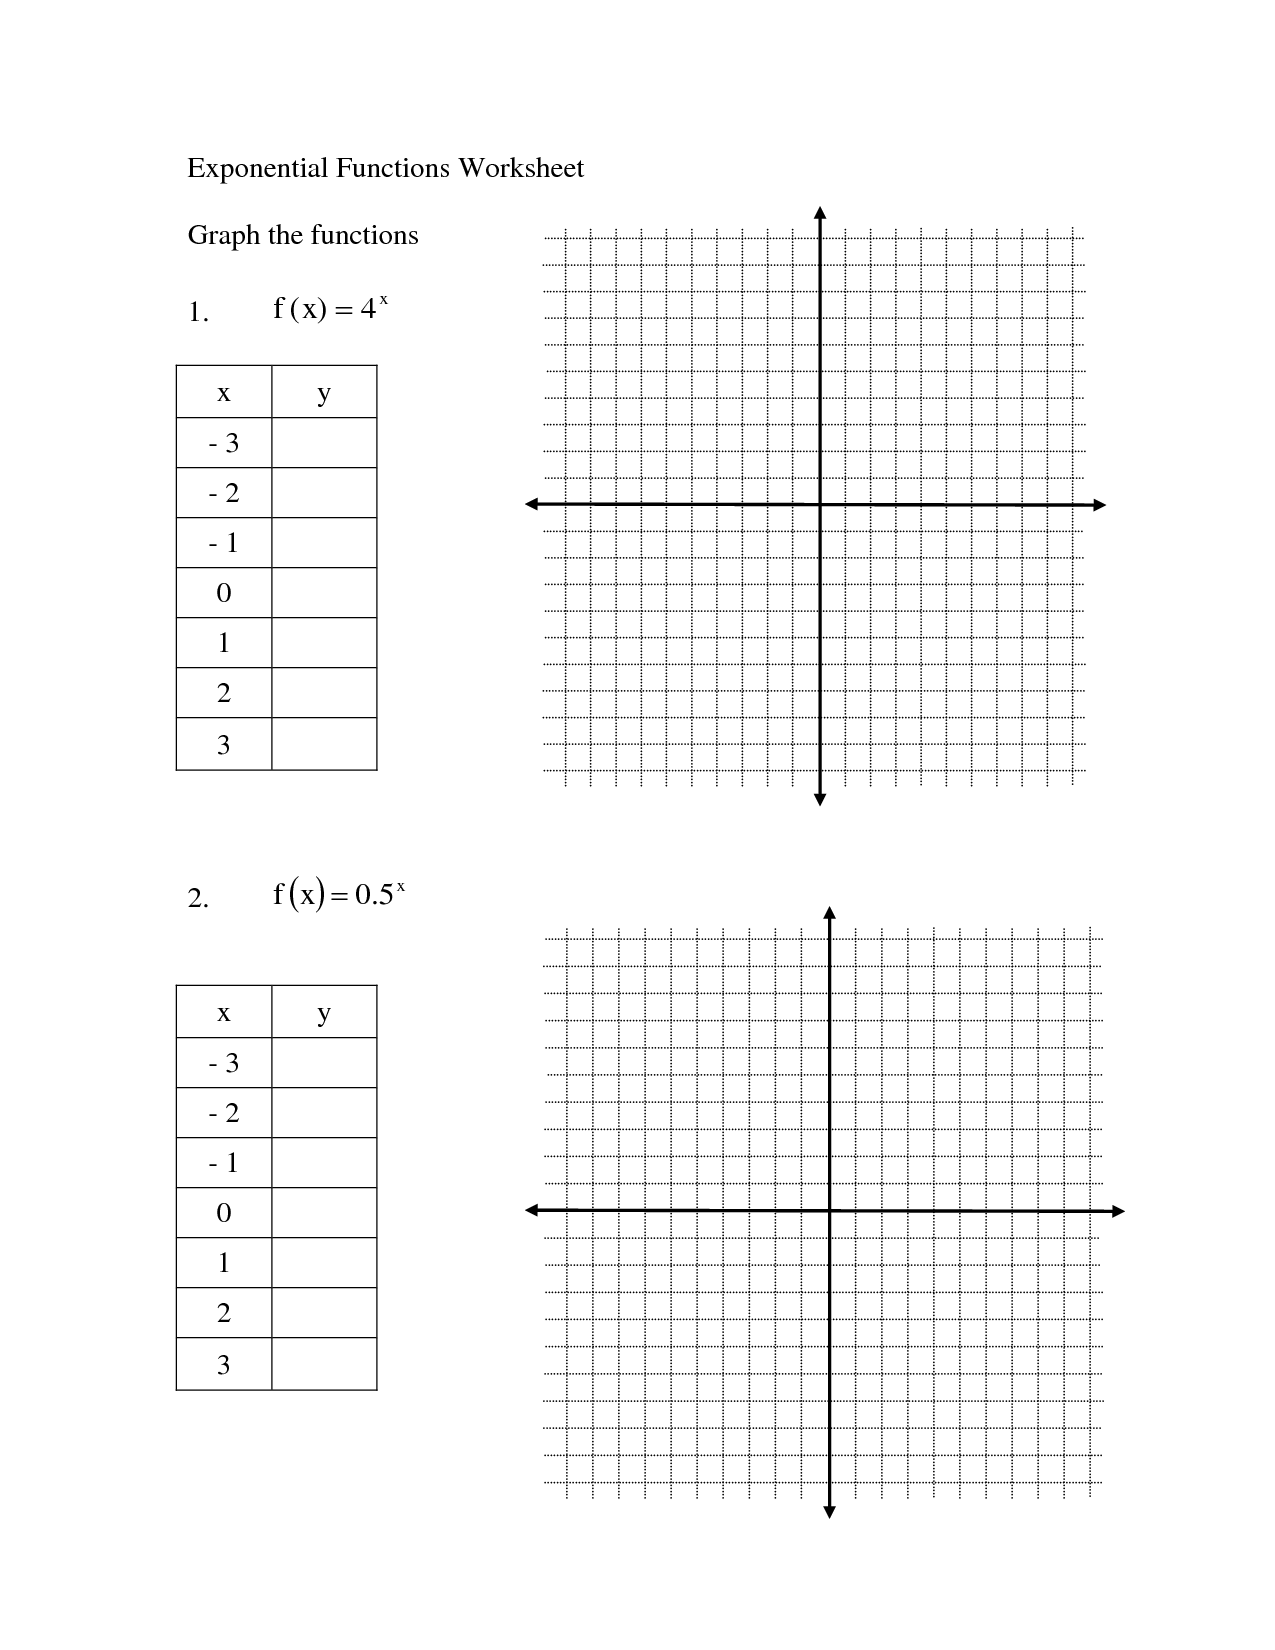 homework 7 graphing exponential functions